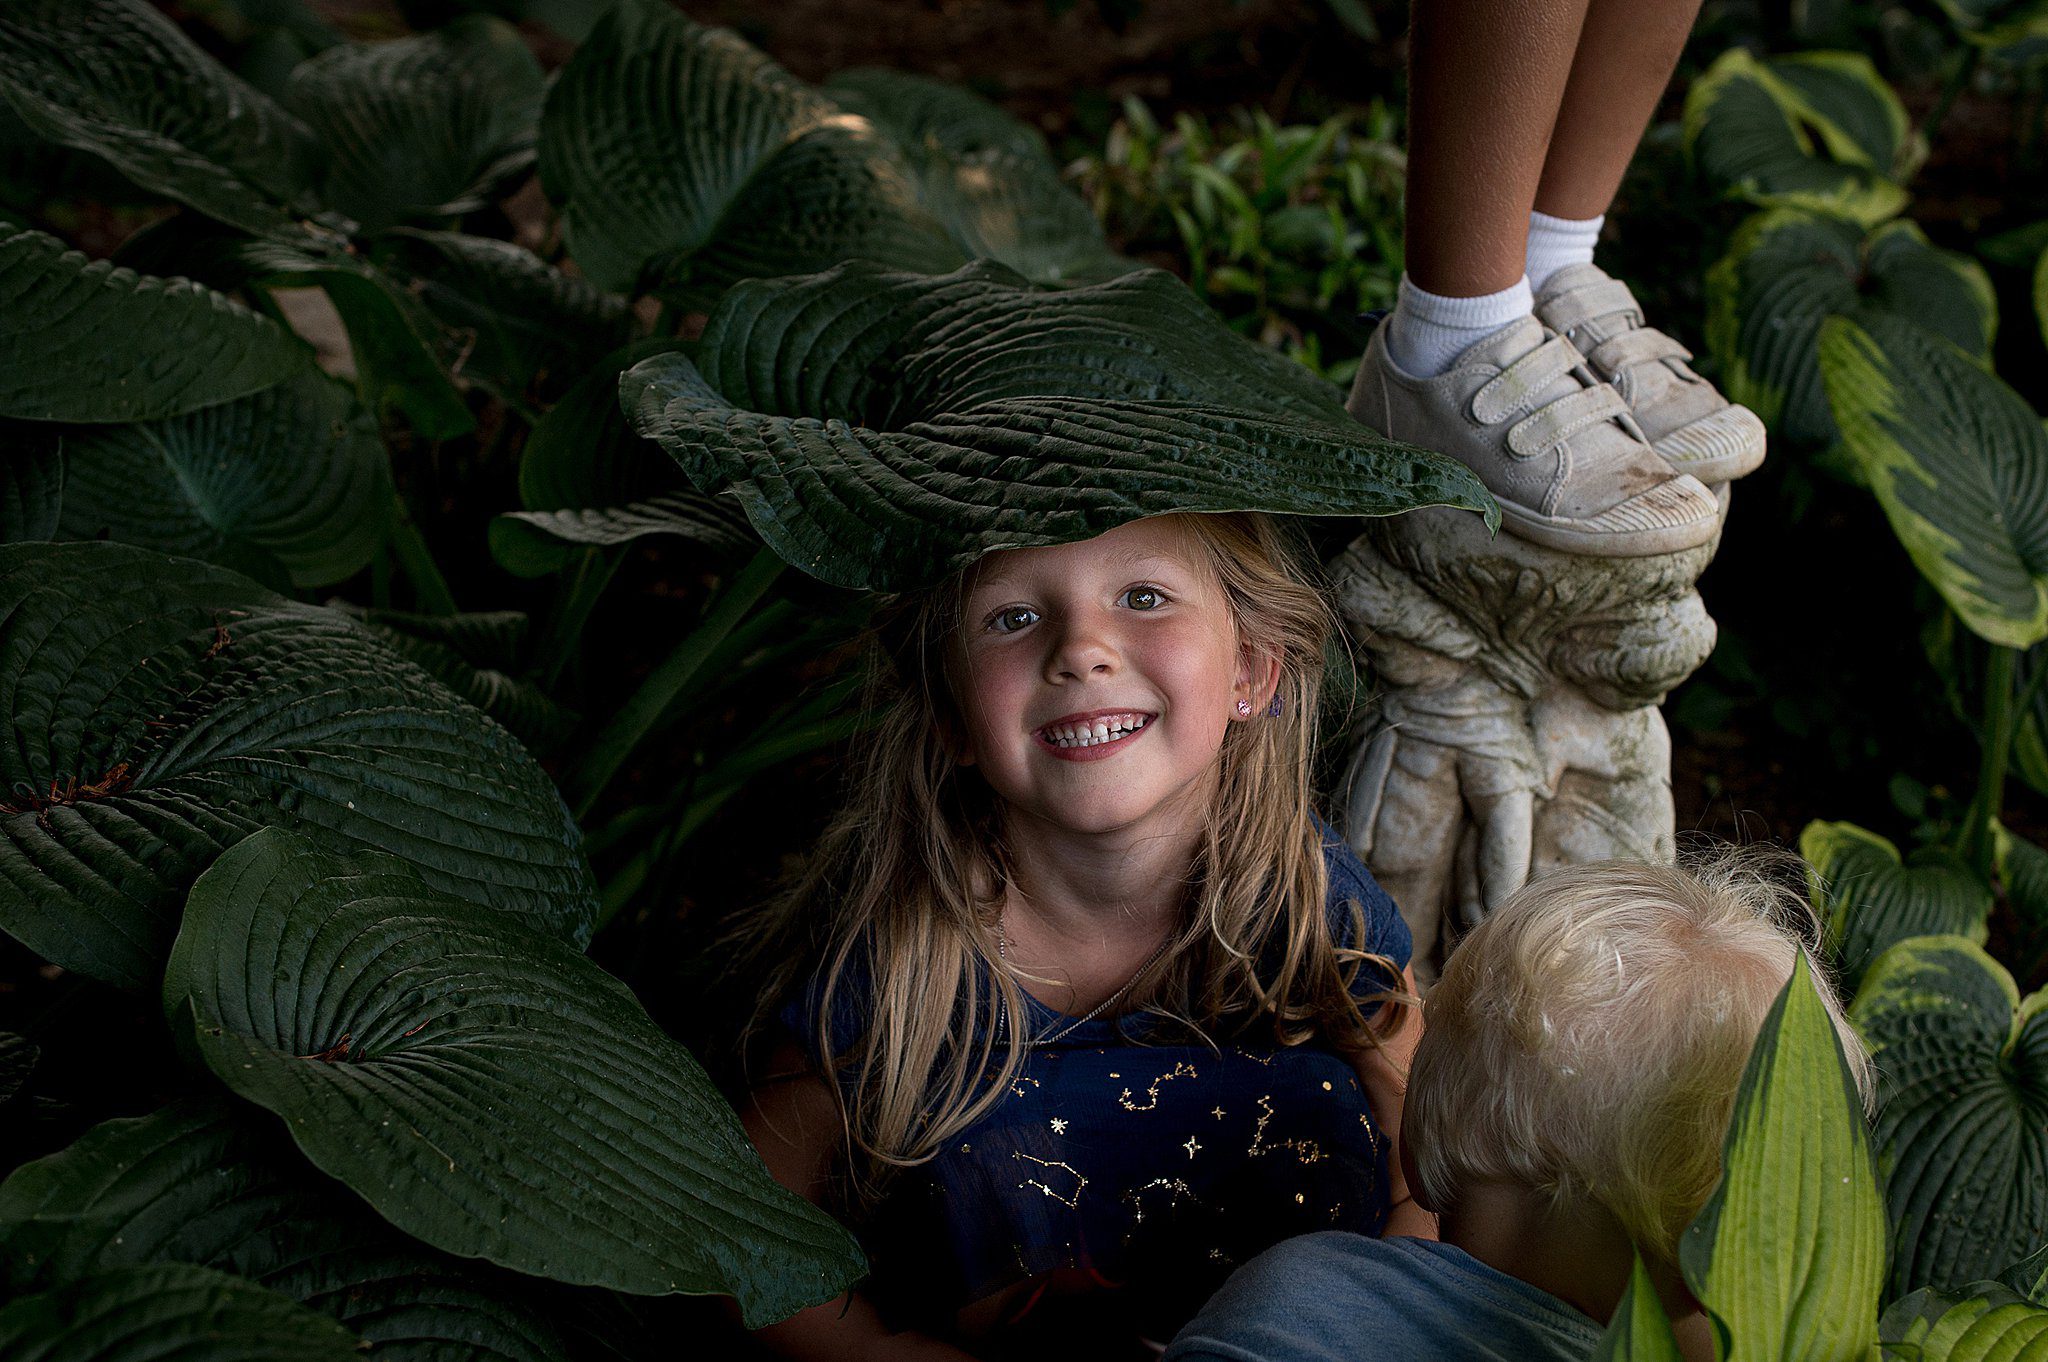 A young girl plays in a garden with her two siblings under a large leaf after daycare guildrod ct